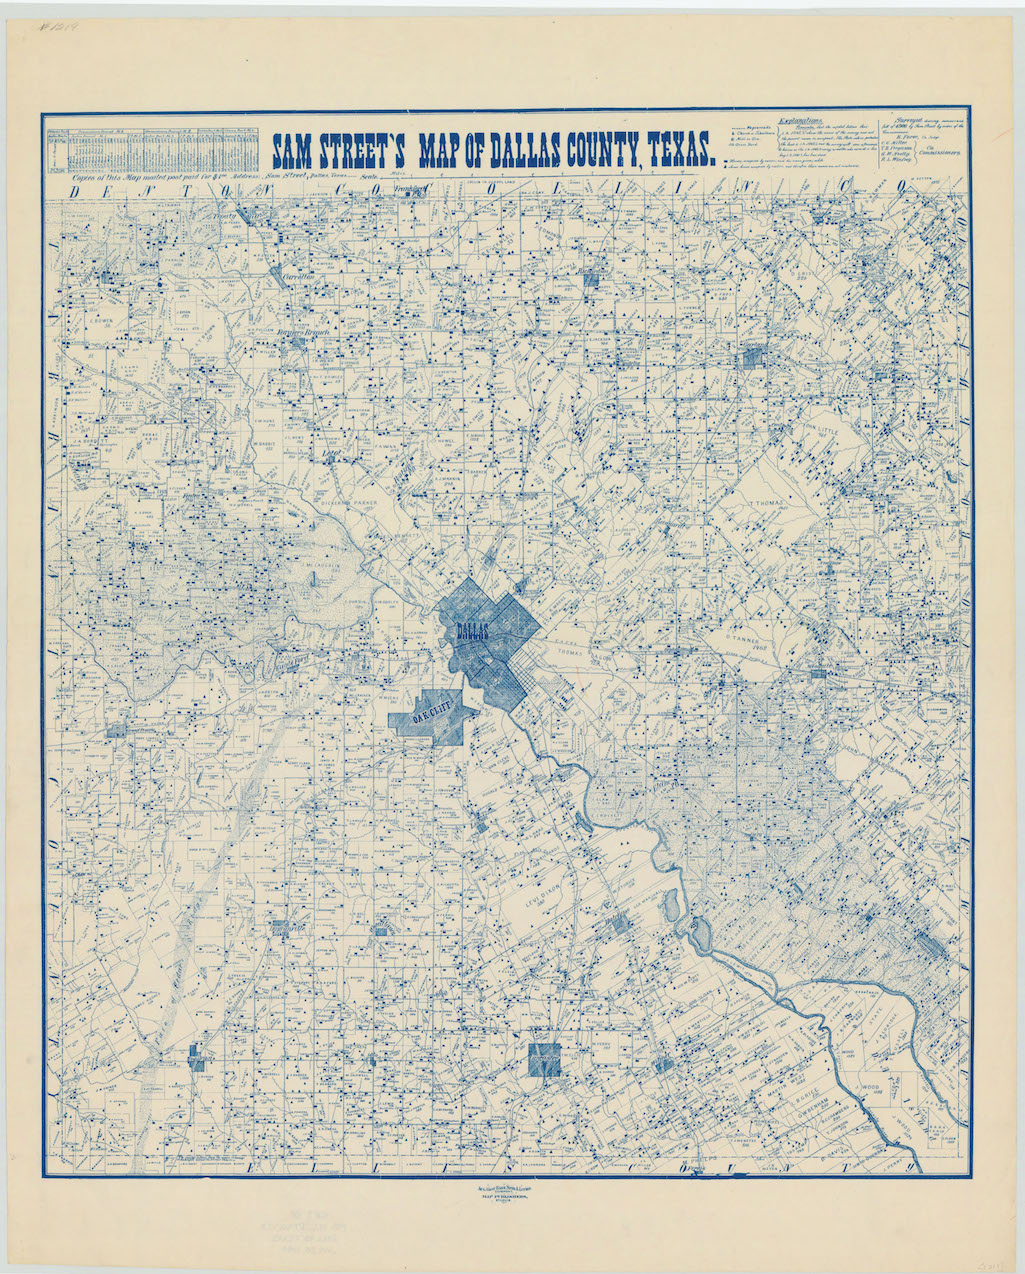 Can You Find Your Neighborhood On This 1900 Map Of Dallas? - Oak Cliff - Street Map Of Dallas Texas